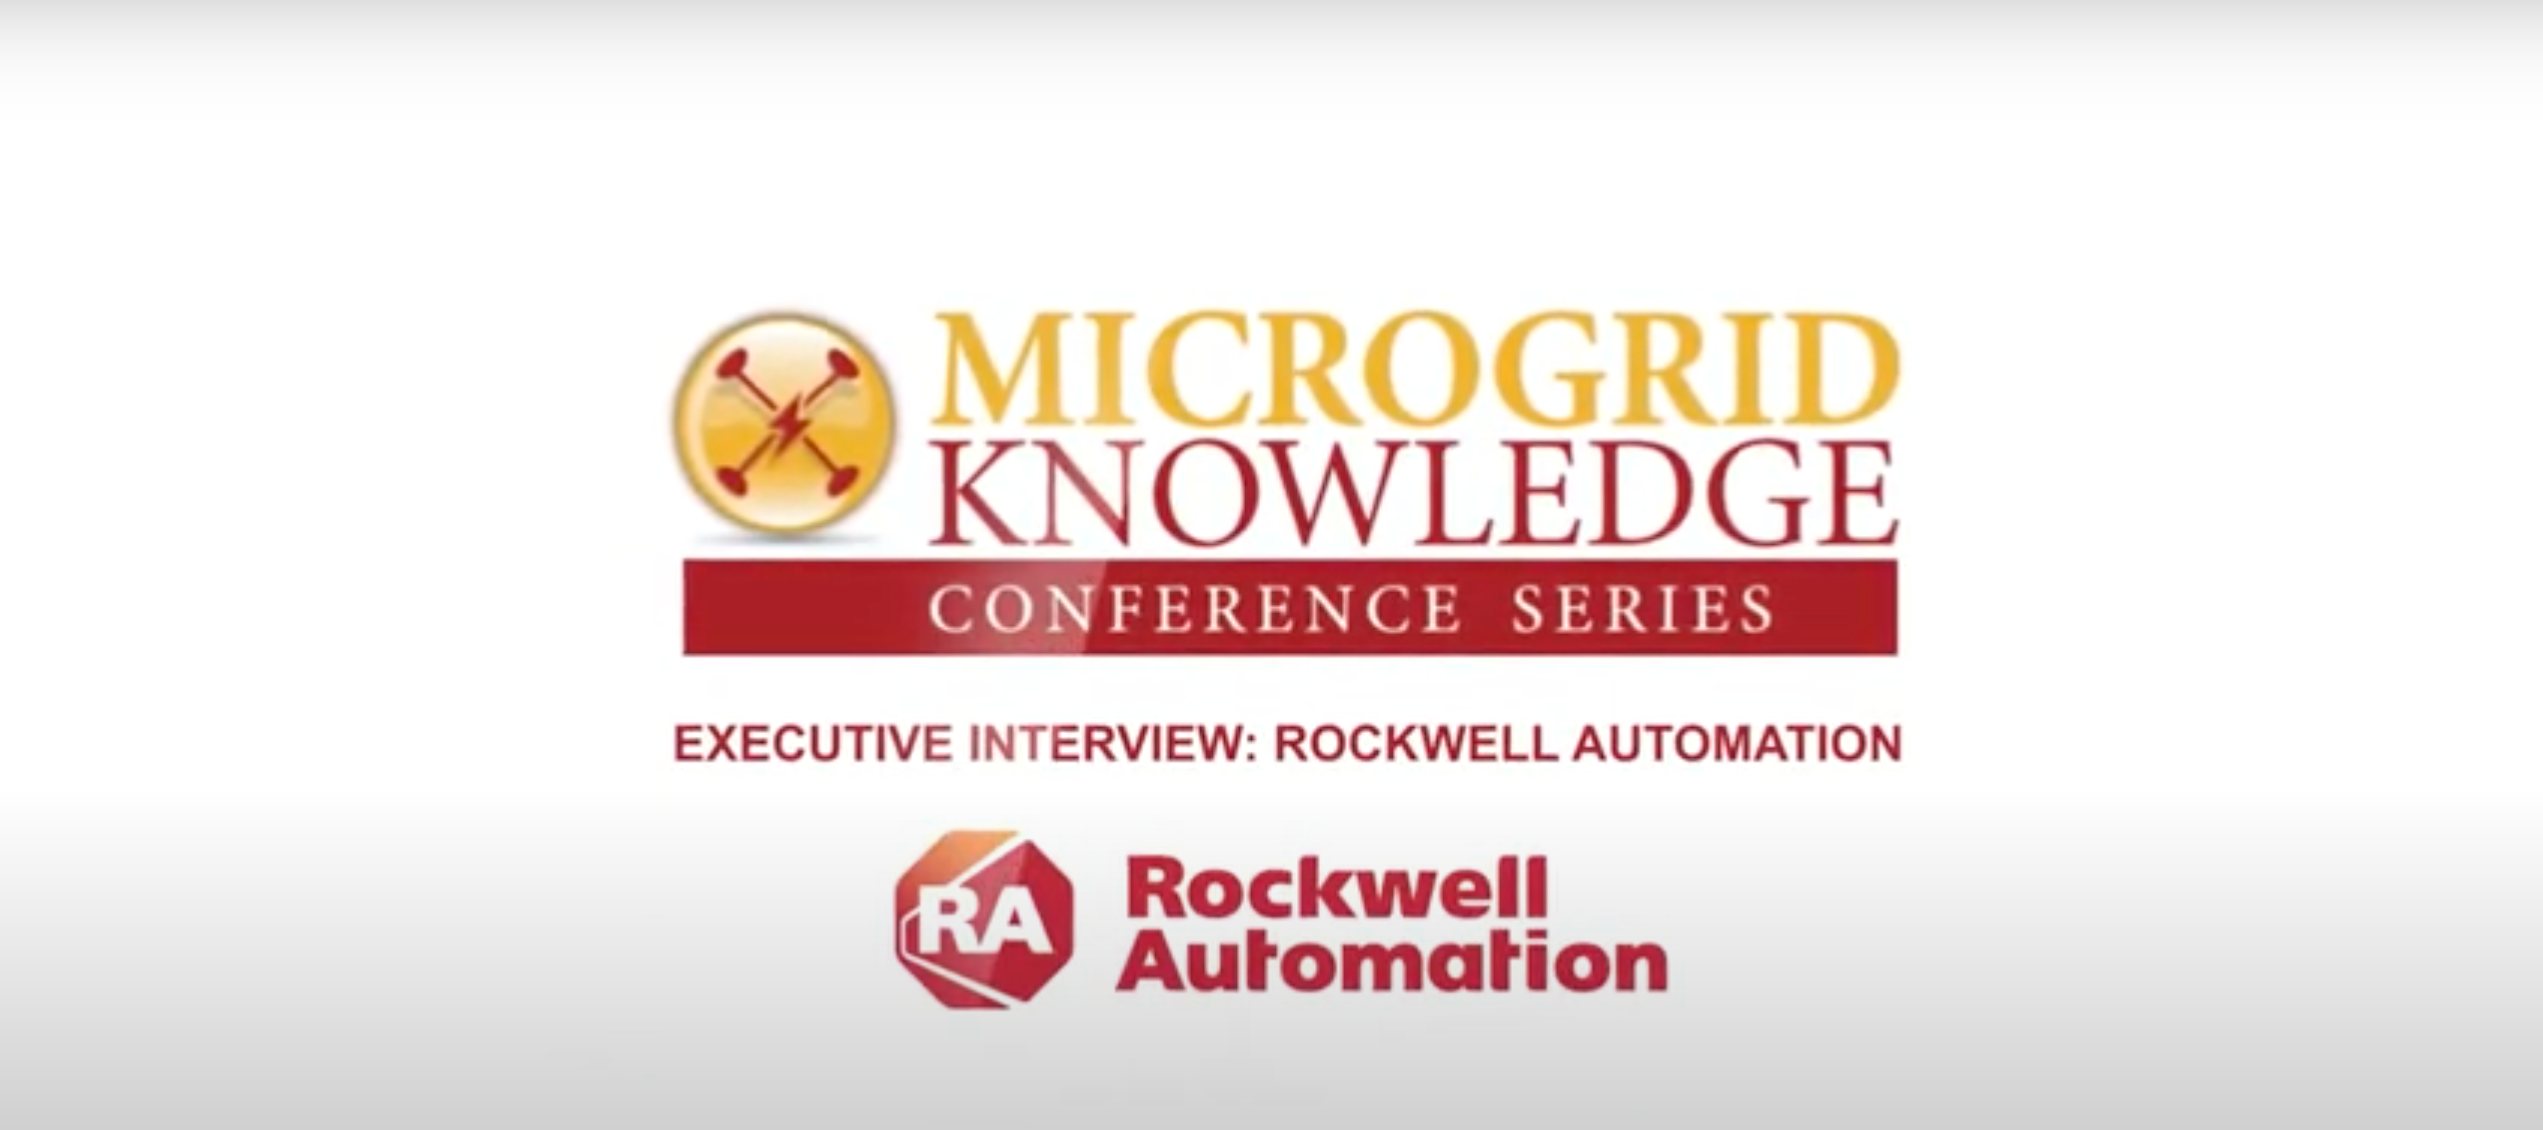 Rockwell Automation shooting for high carbon neutrality goals across manufacturing facilities by 2030